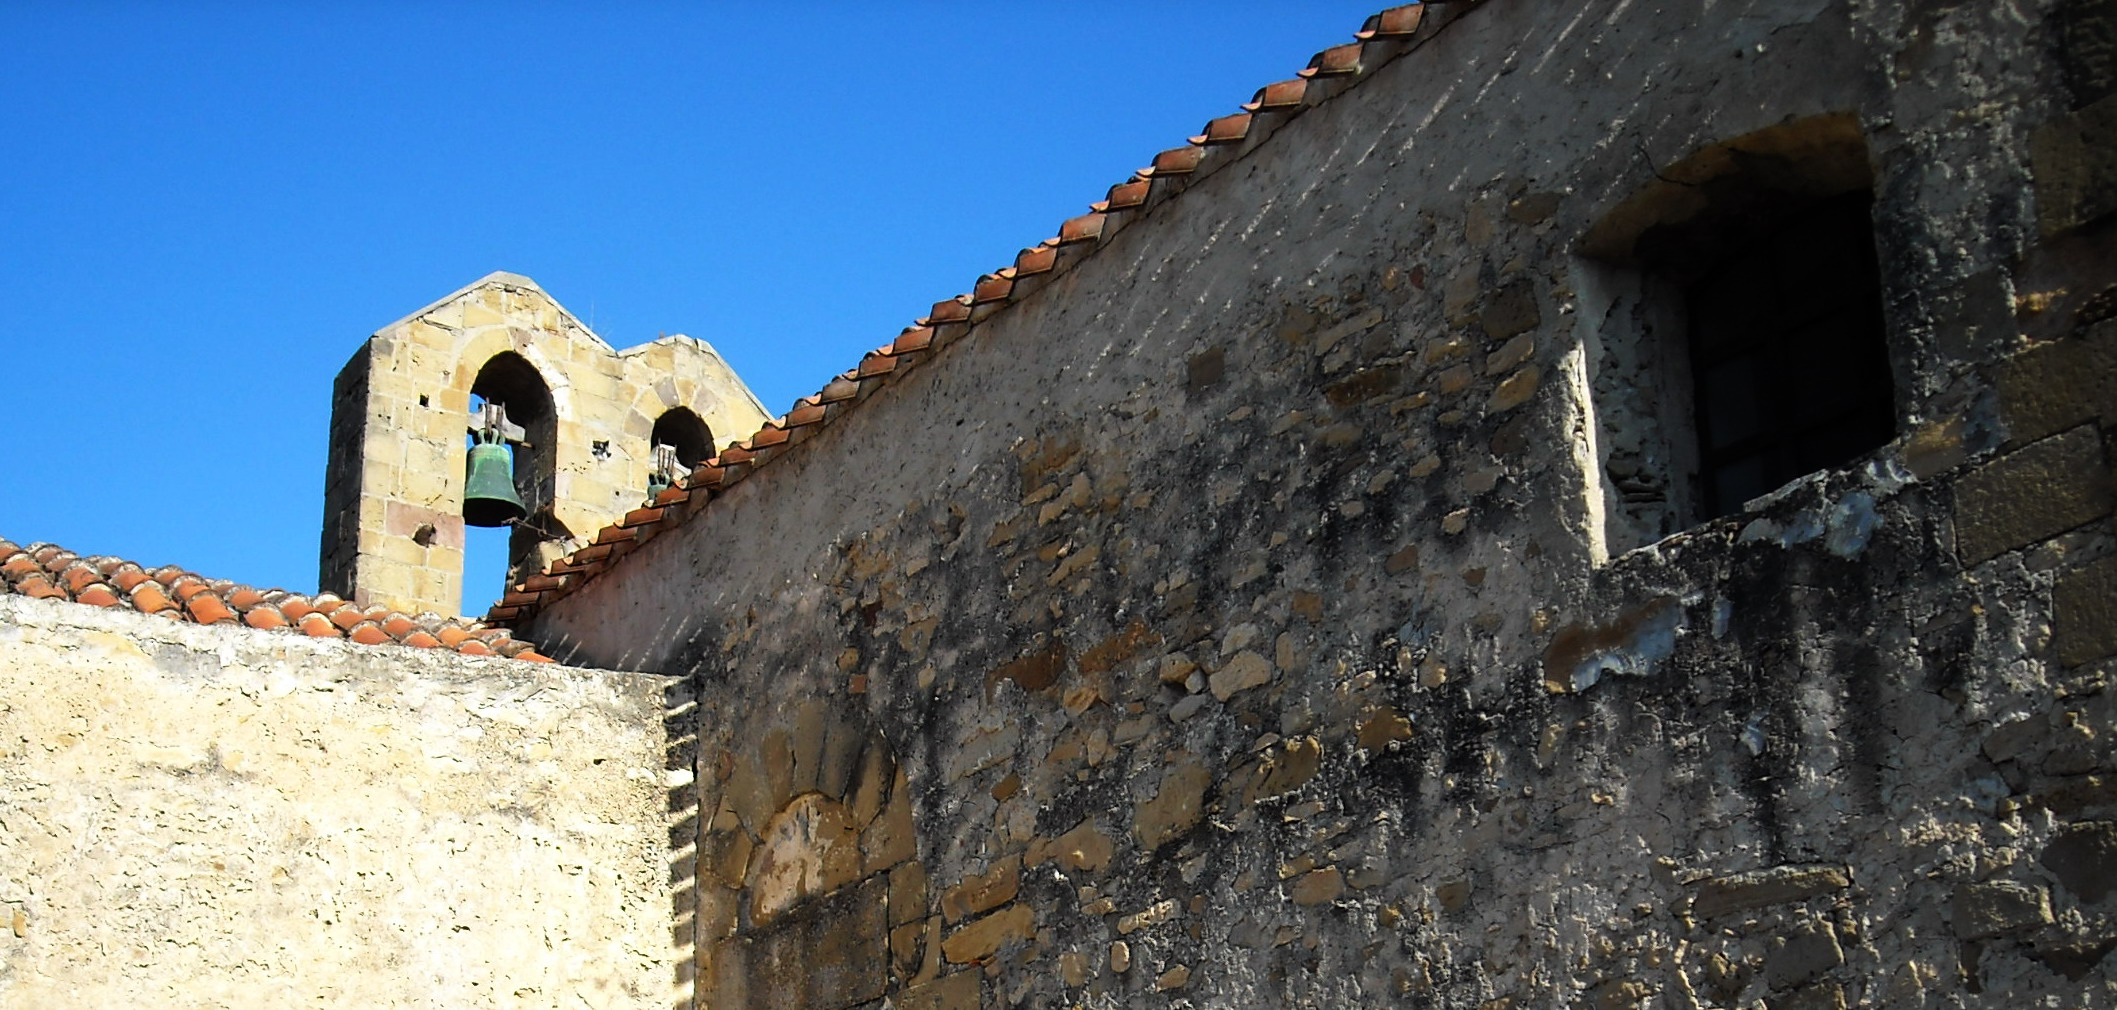 a church bell in a medieval castle like building